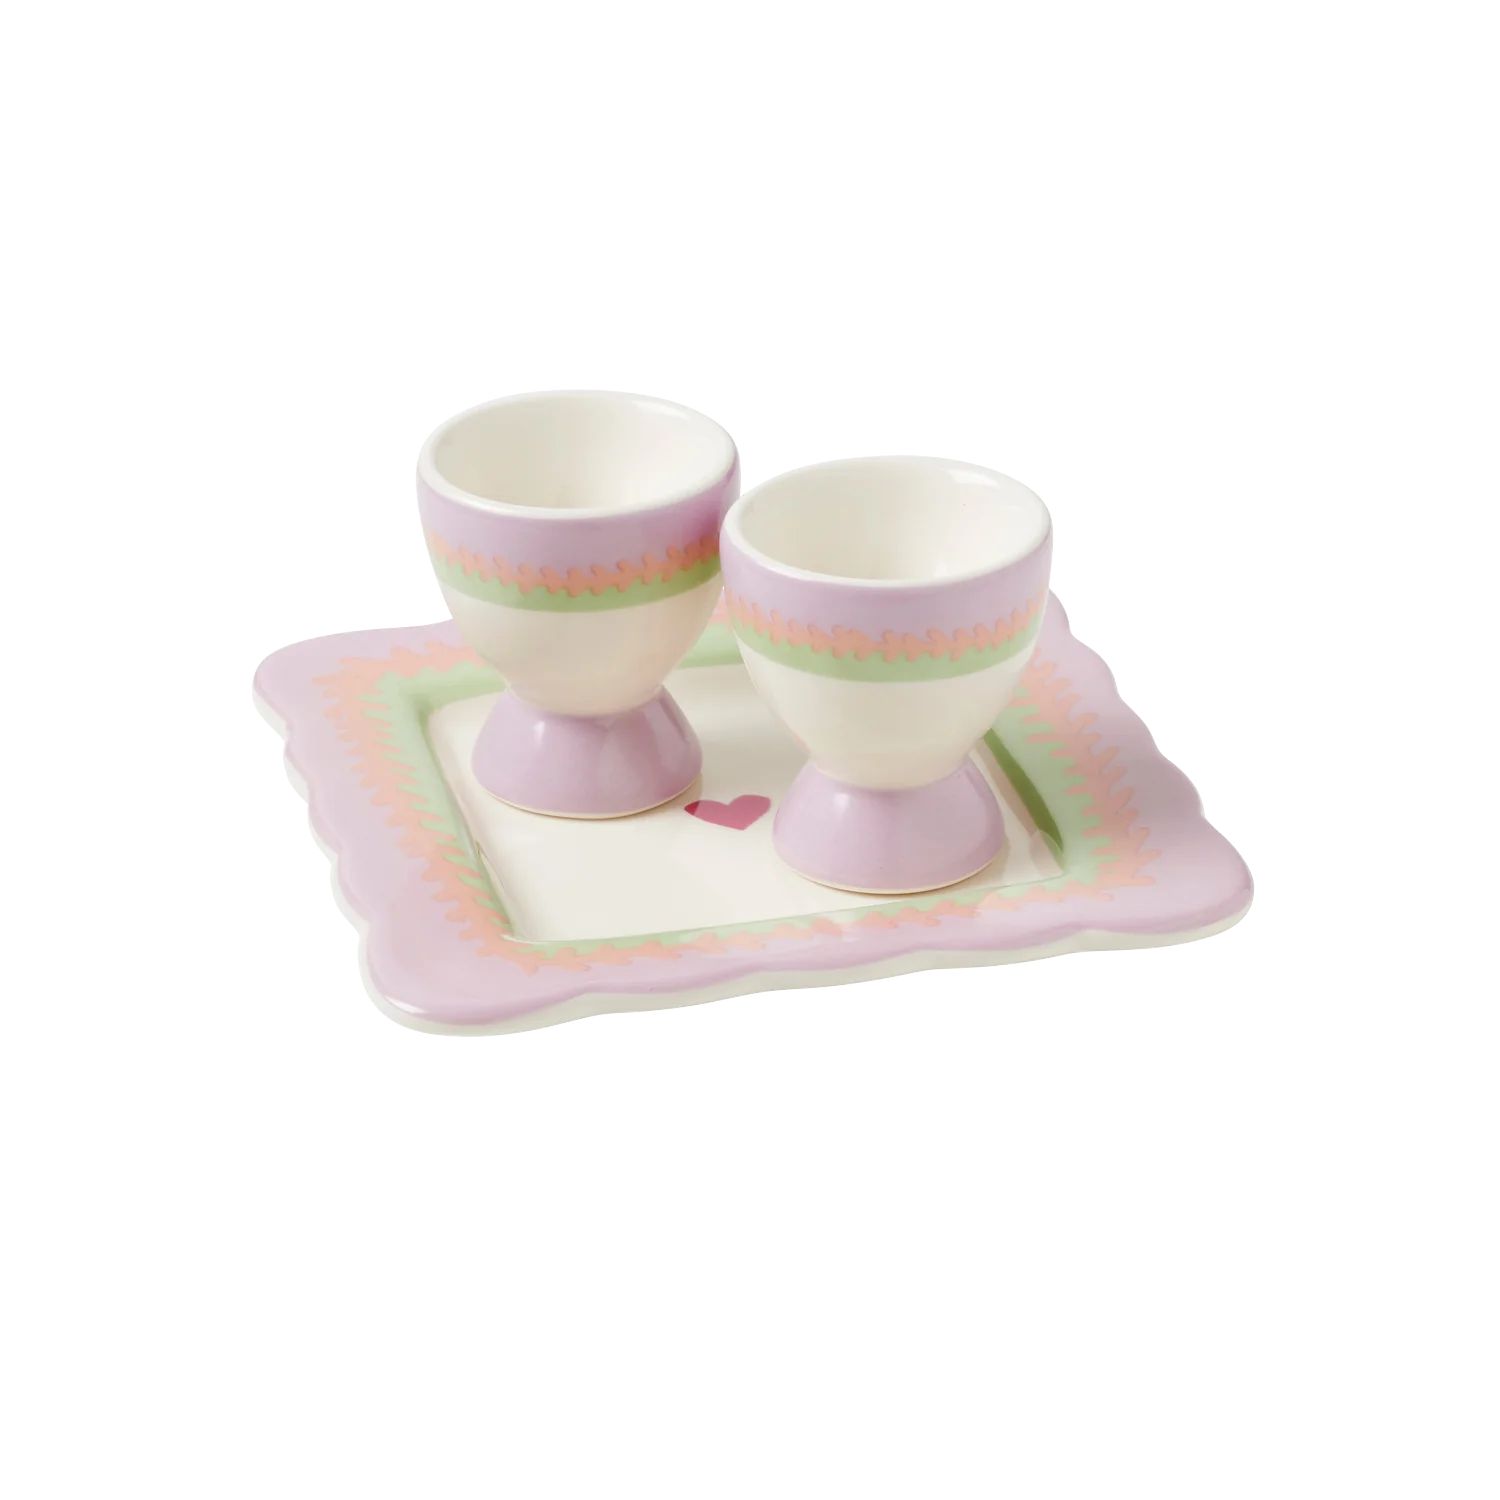 Pastel Egg Cup Set | In the Roundhouse